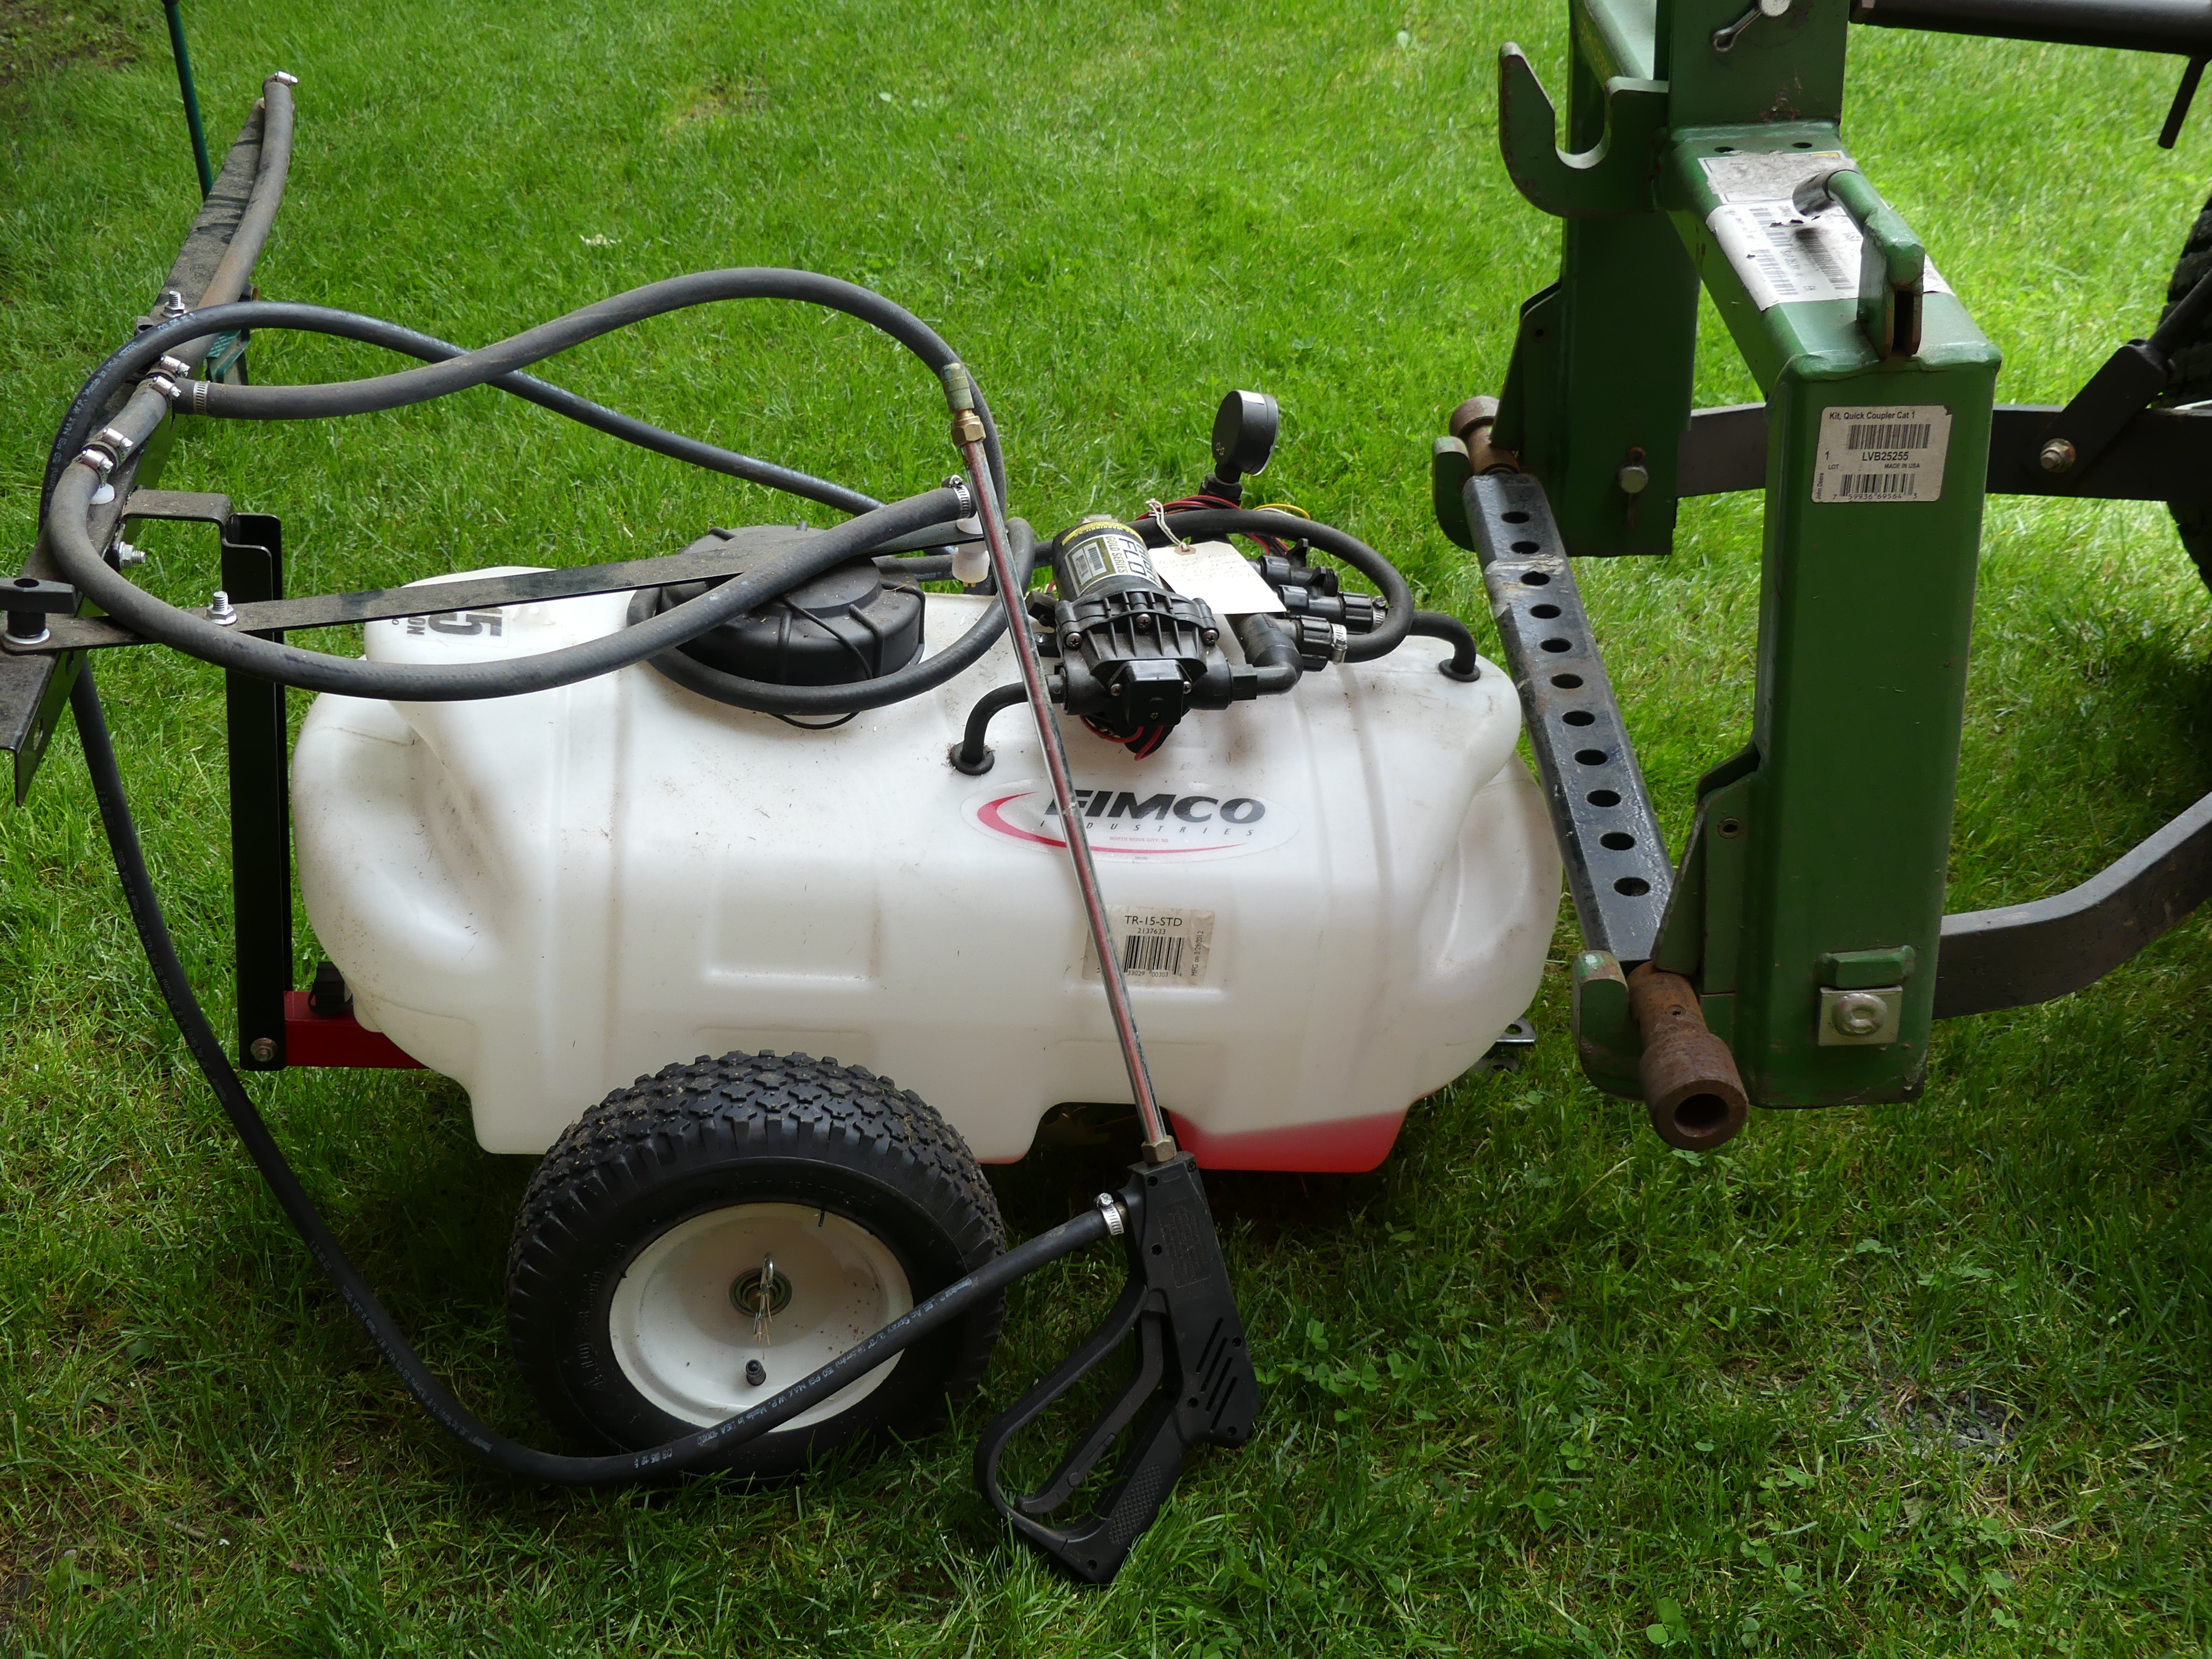 For larger properties there are electric sprayers that can be pulled by riding mowers, golf carts, tractors and ATVs. Power for the electric pump comes from the tow vehicle via an easy hook-up and spraying is done from a wand or boom. Capacities are 15 gallons and up and prices begin around $250. ANDREW MESSINGER